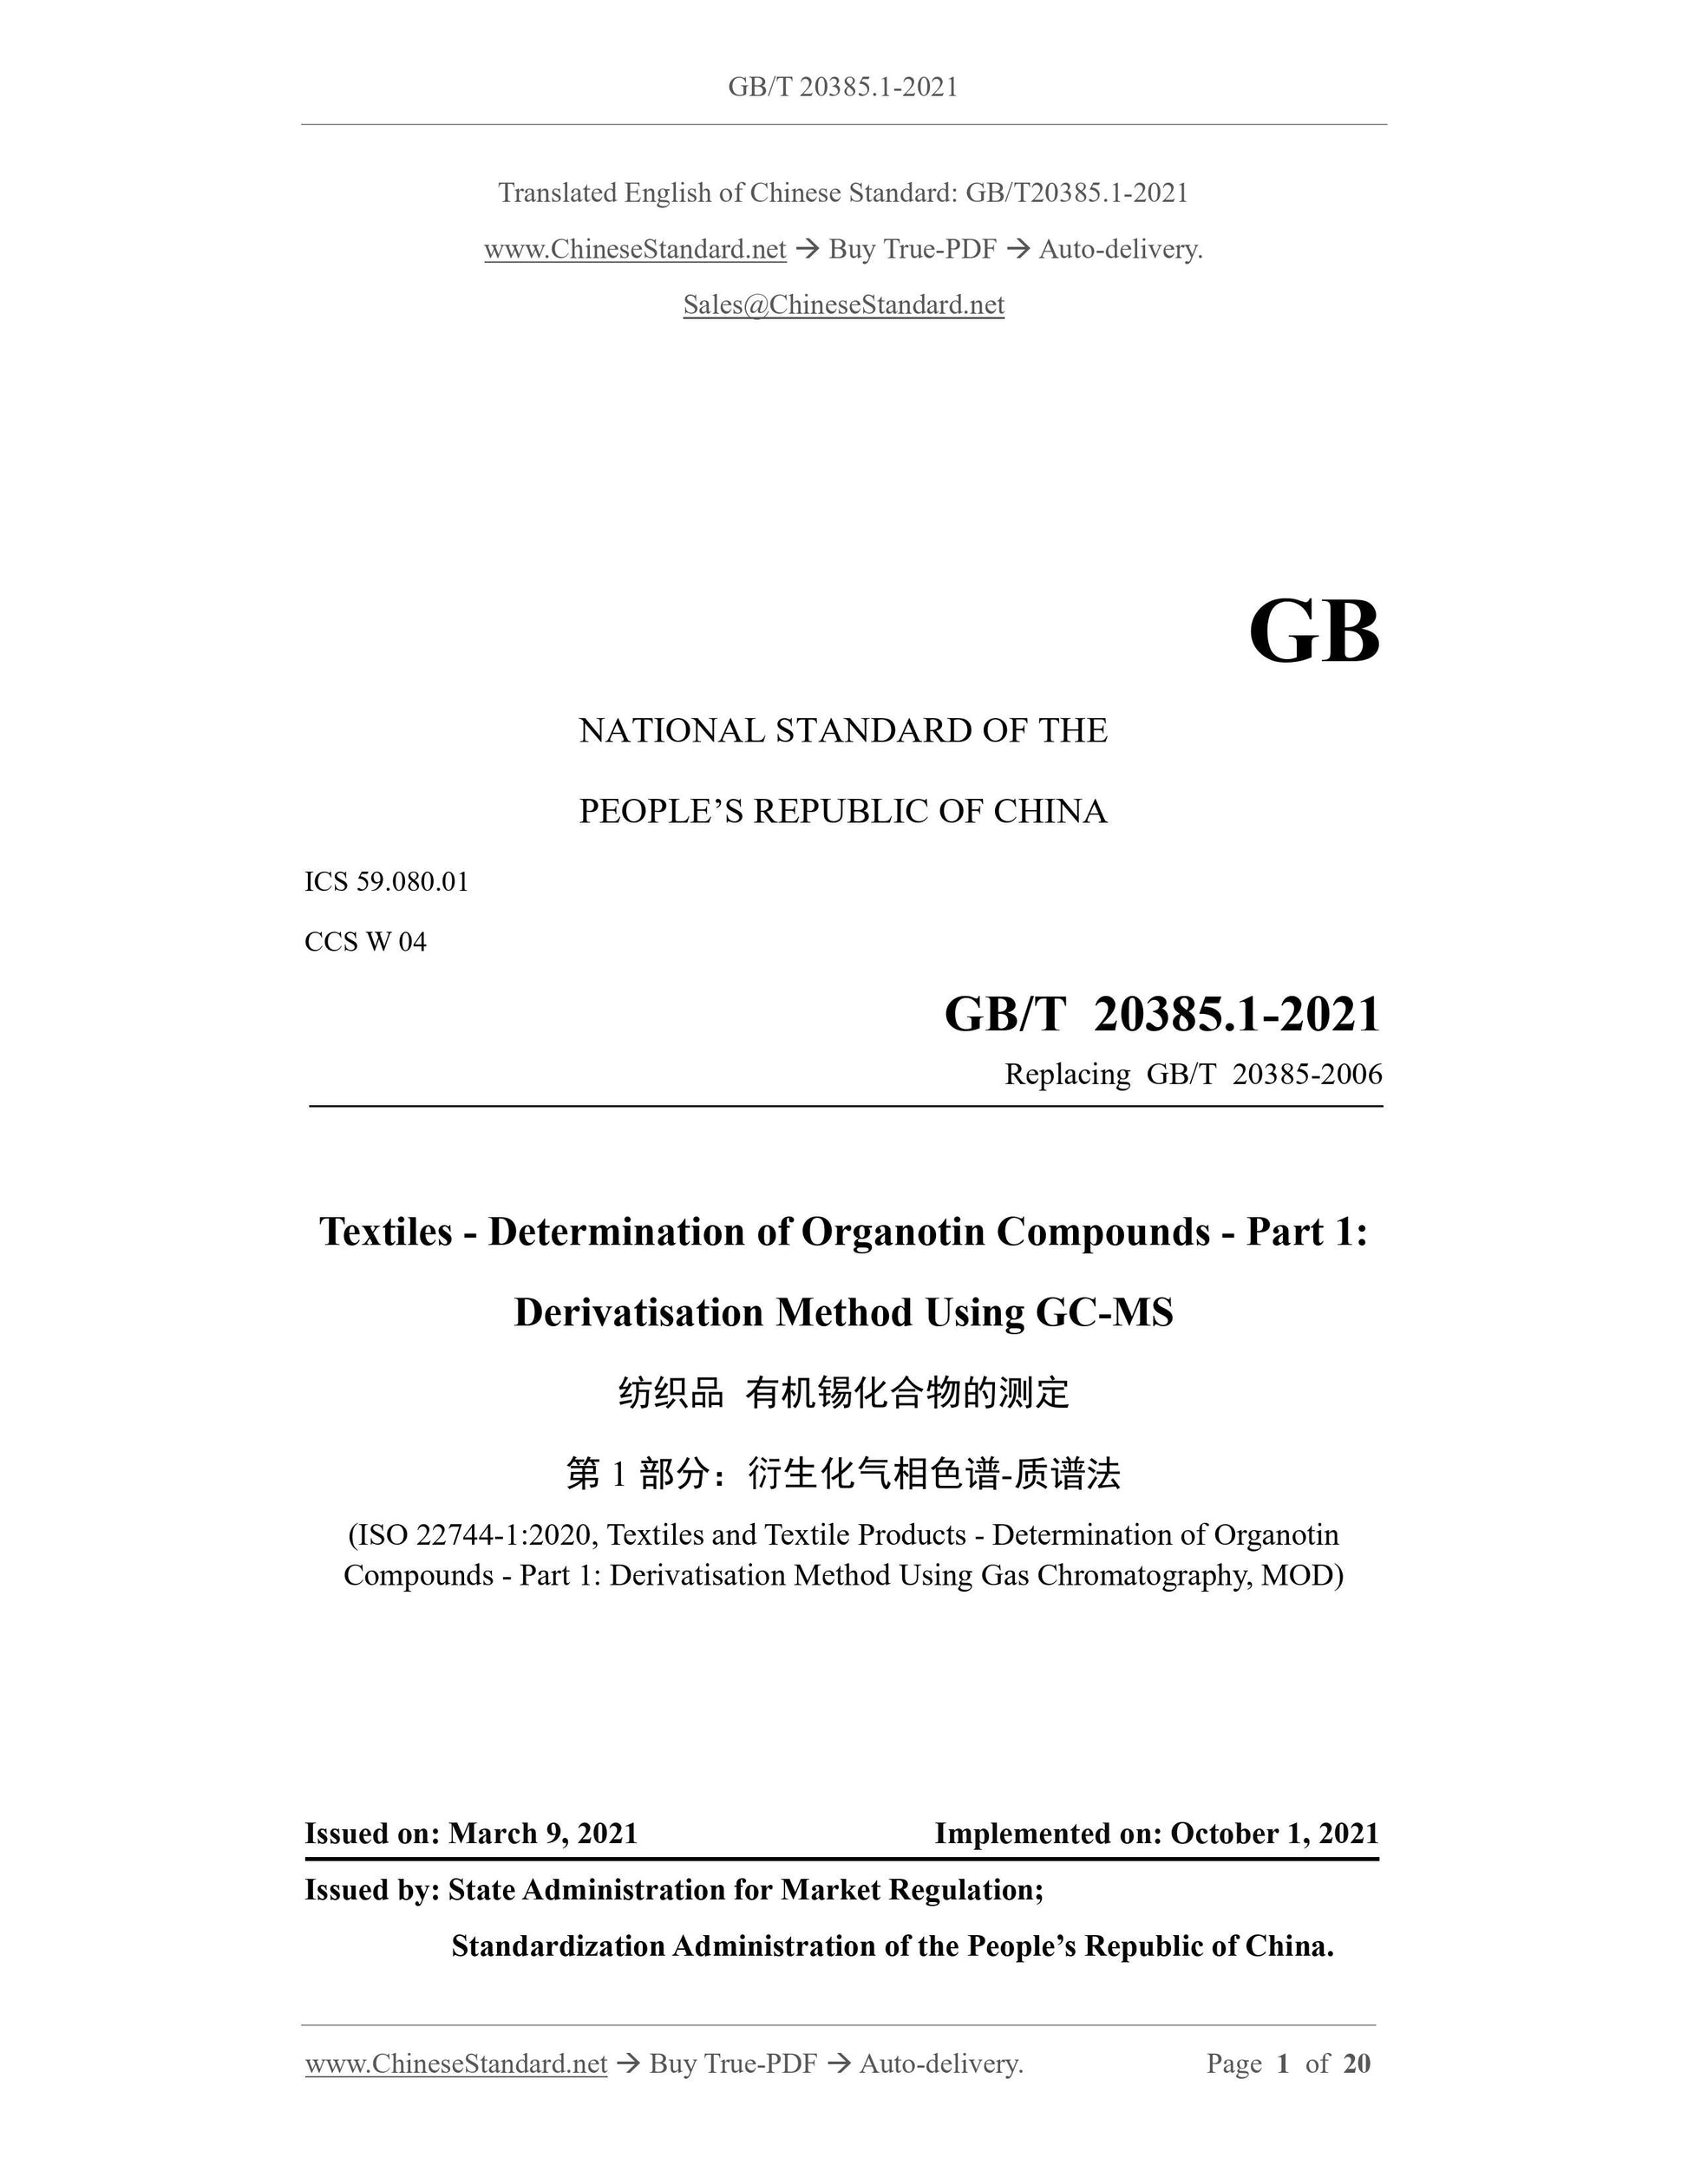 GB/T 20385.1-2021 Page 1